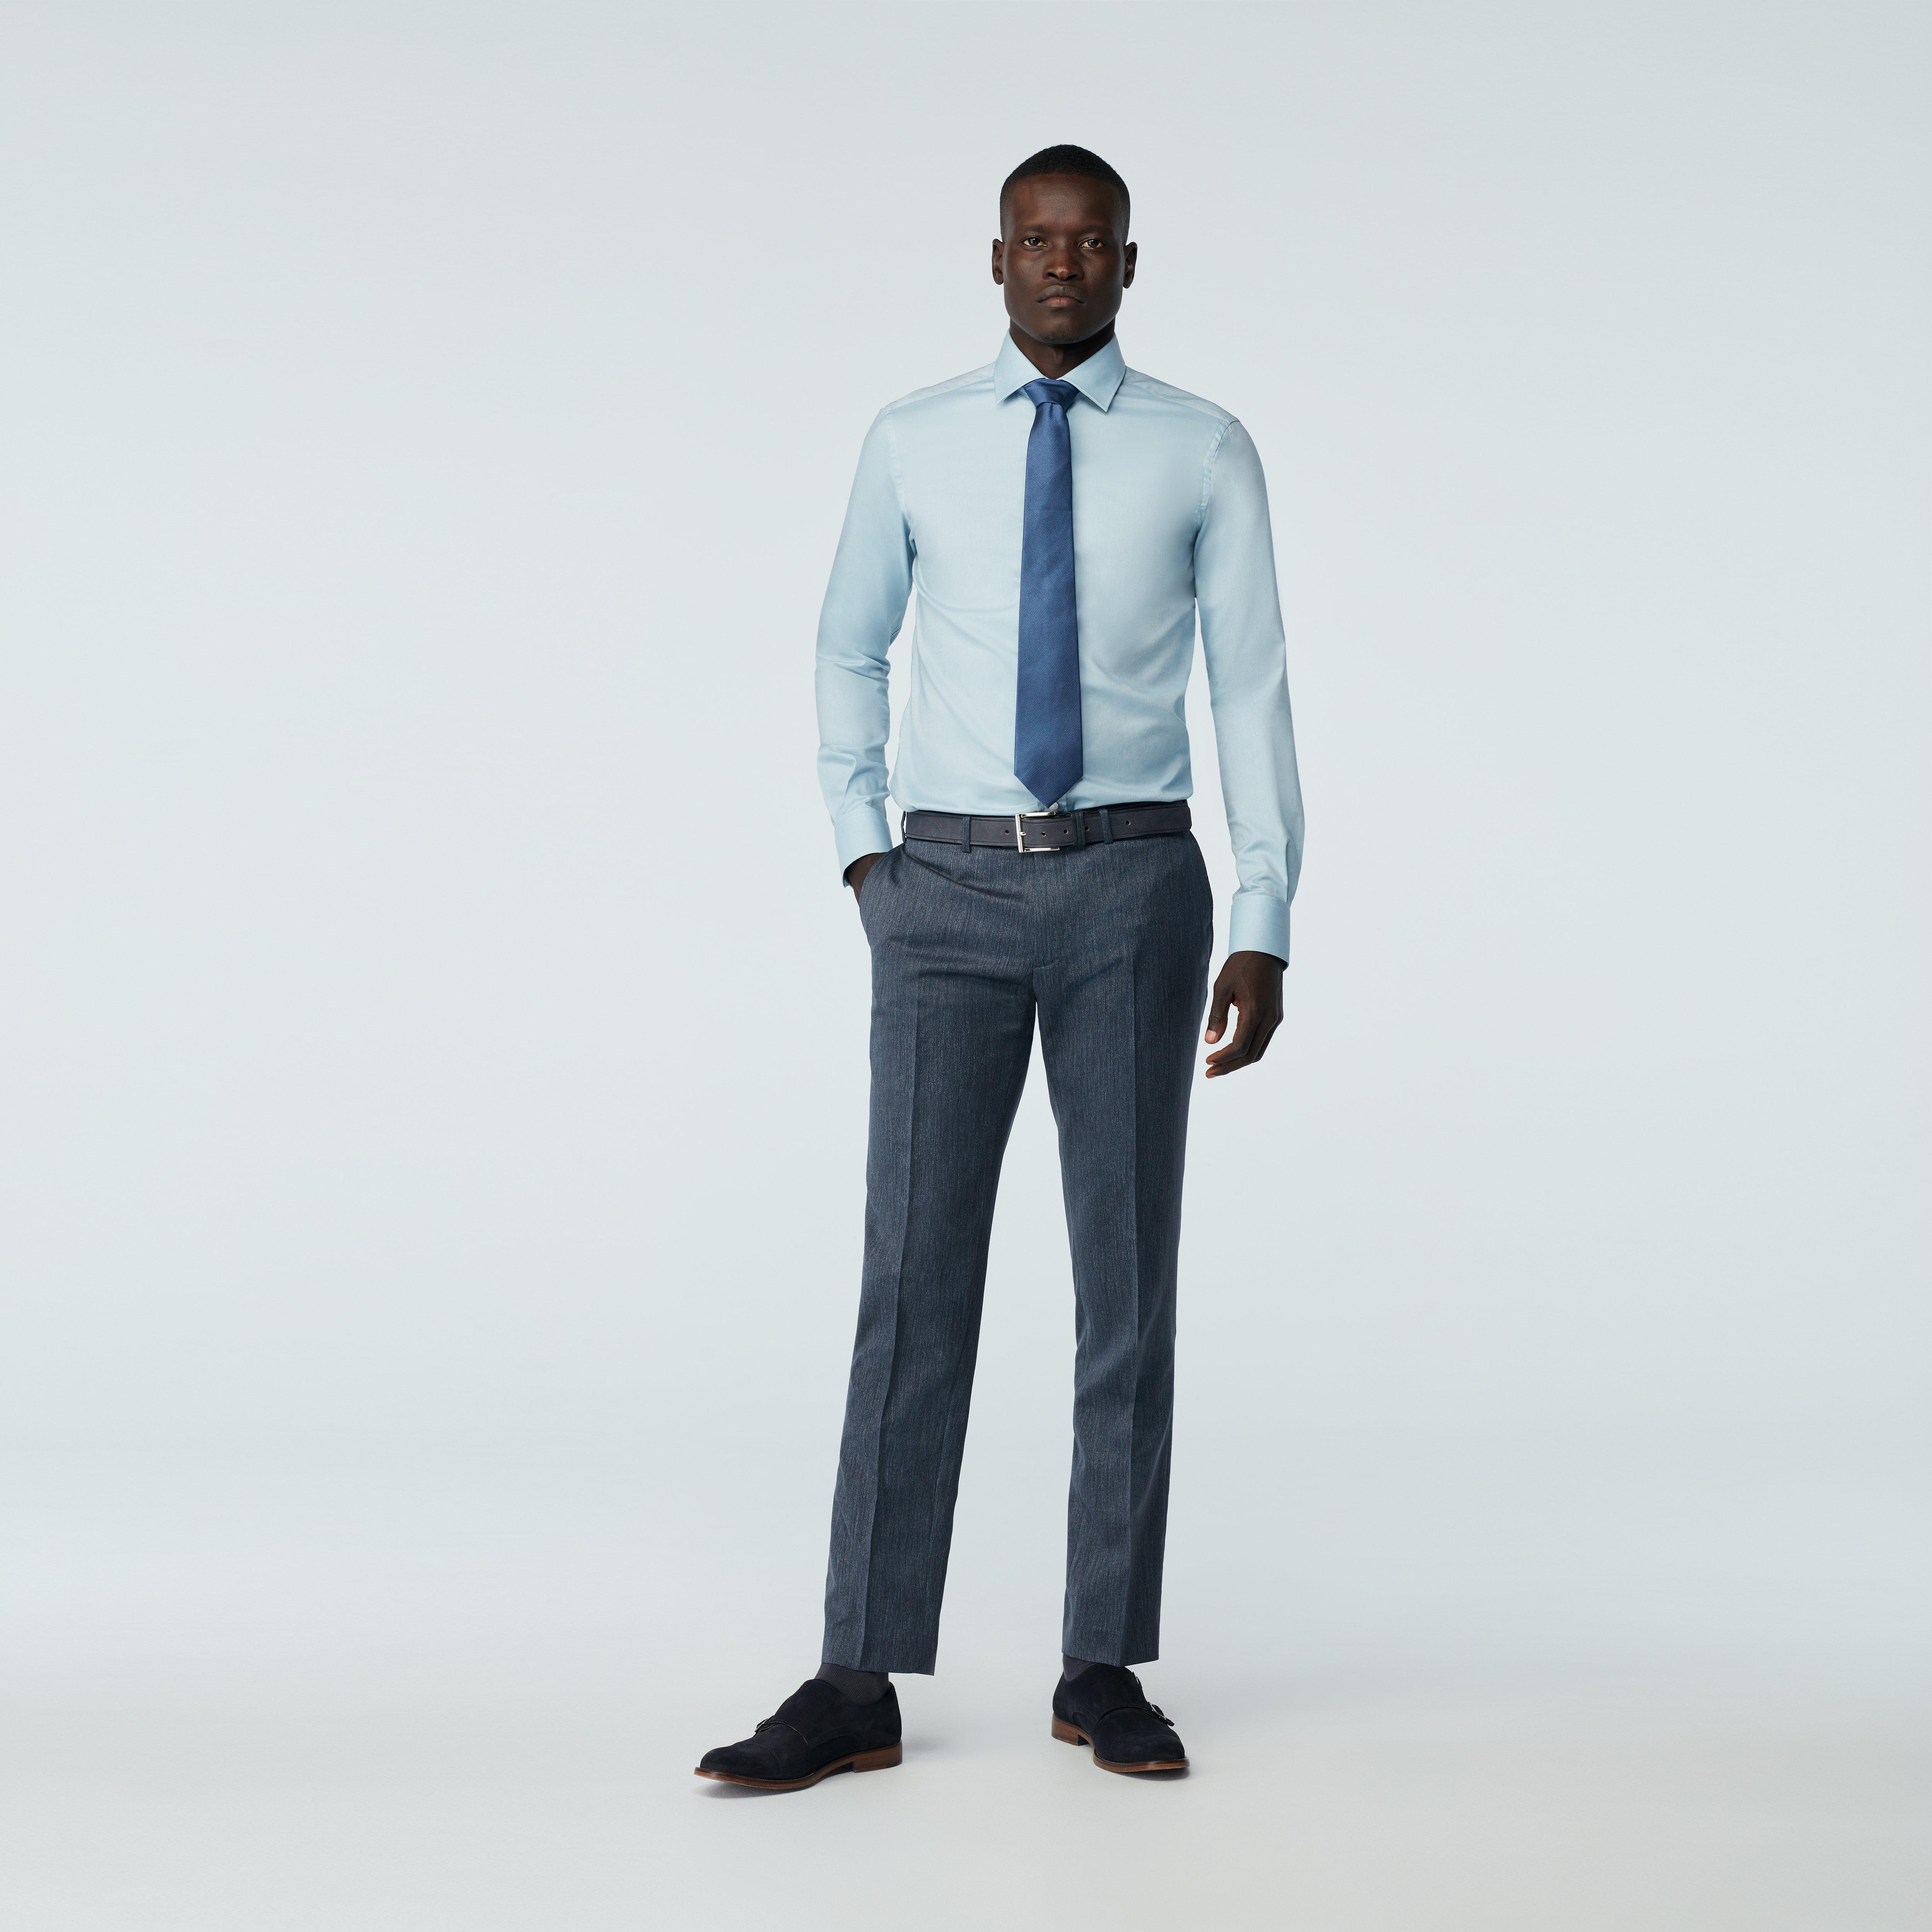 Custom Suits Made For You - Messina Dark Blue Suit | INDOCHINO